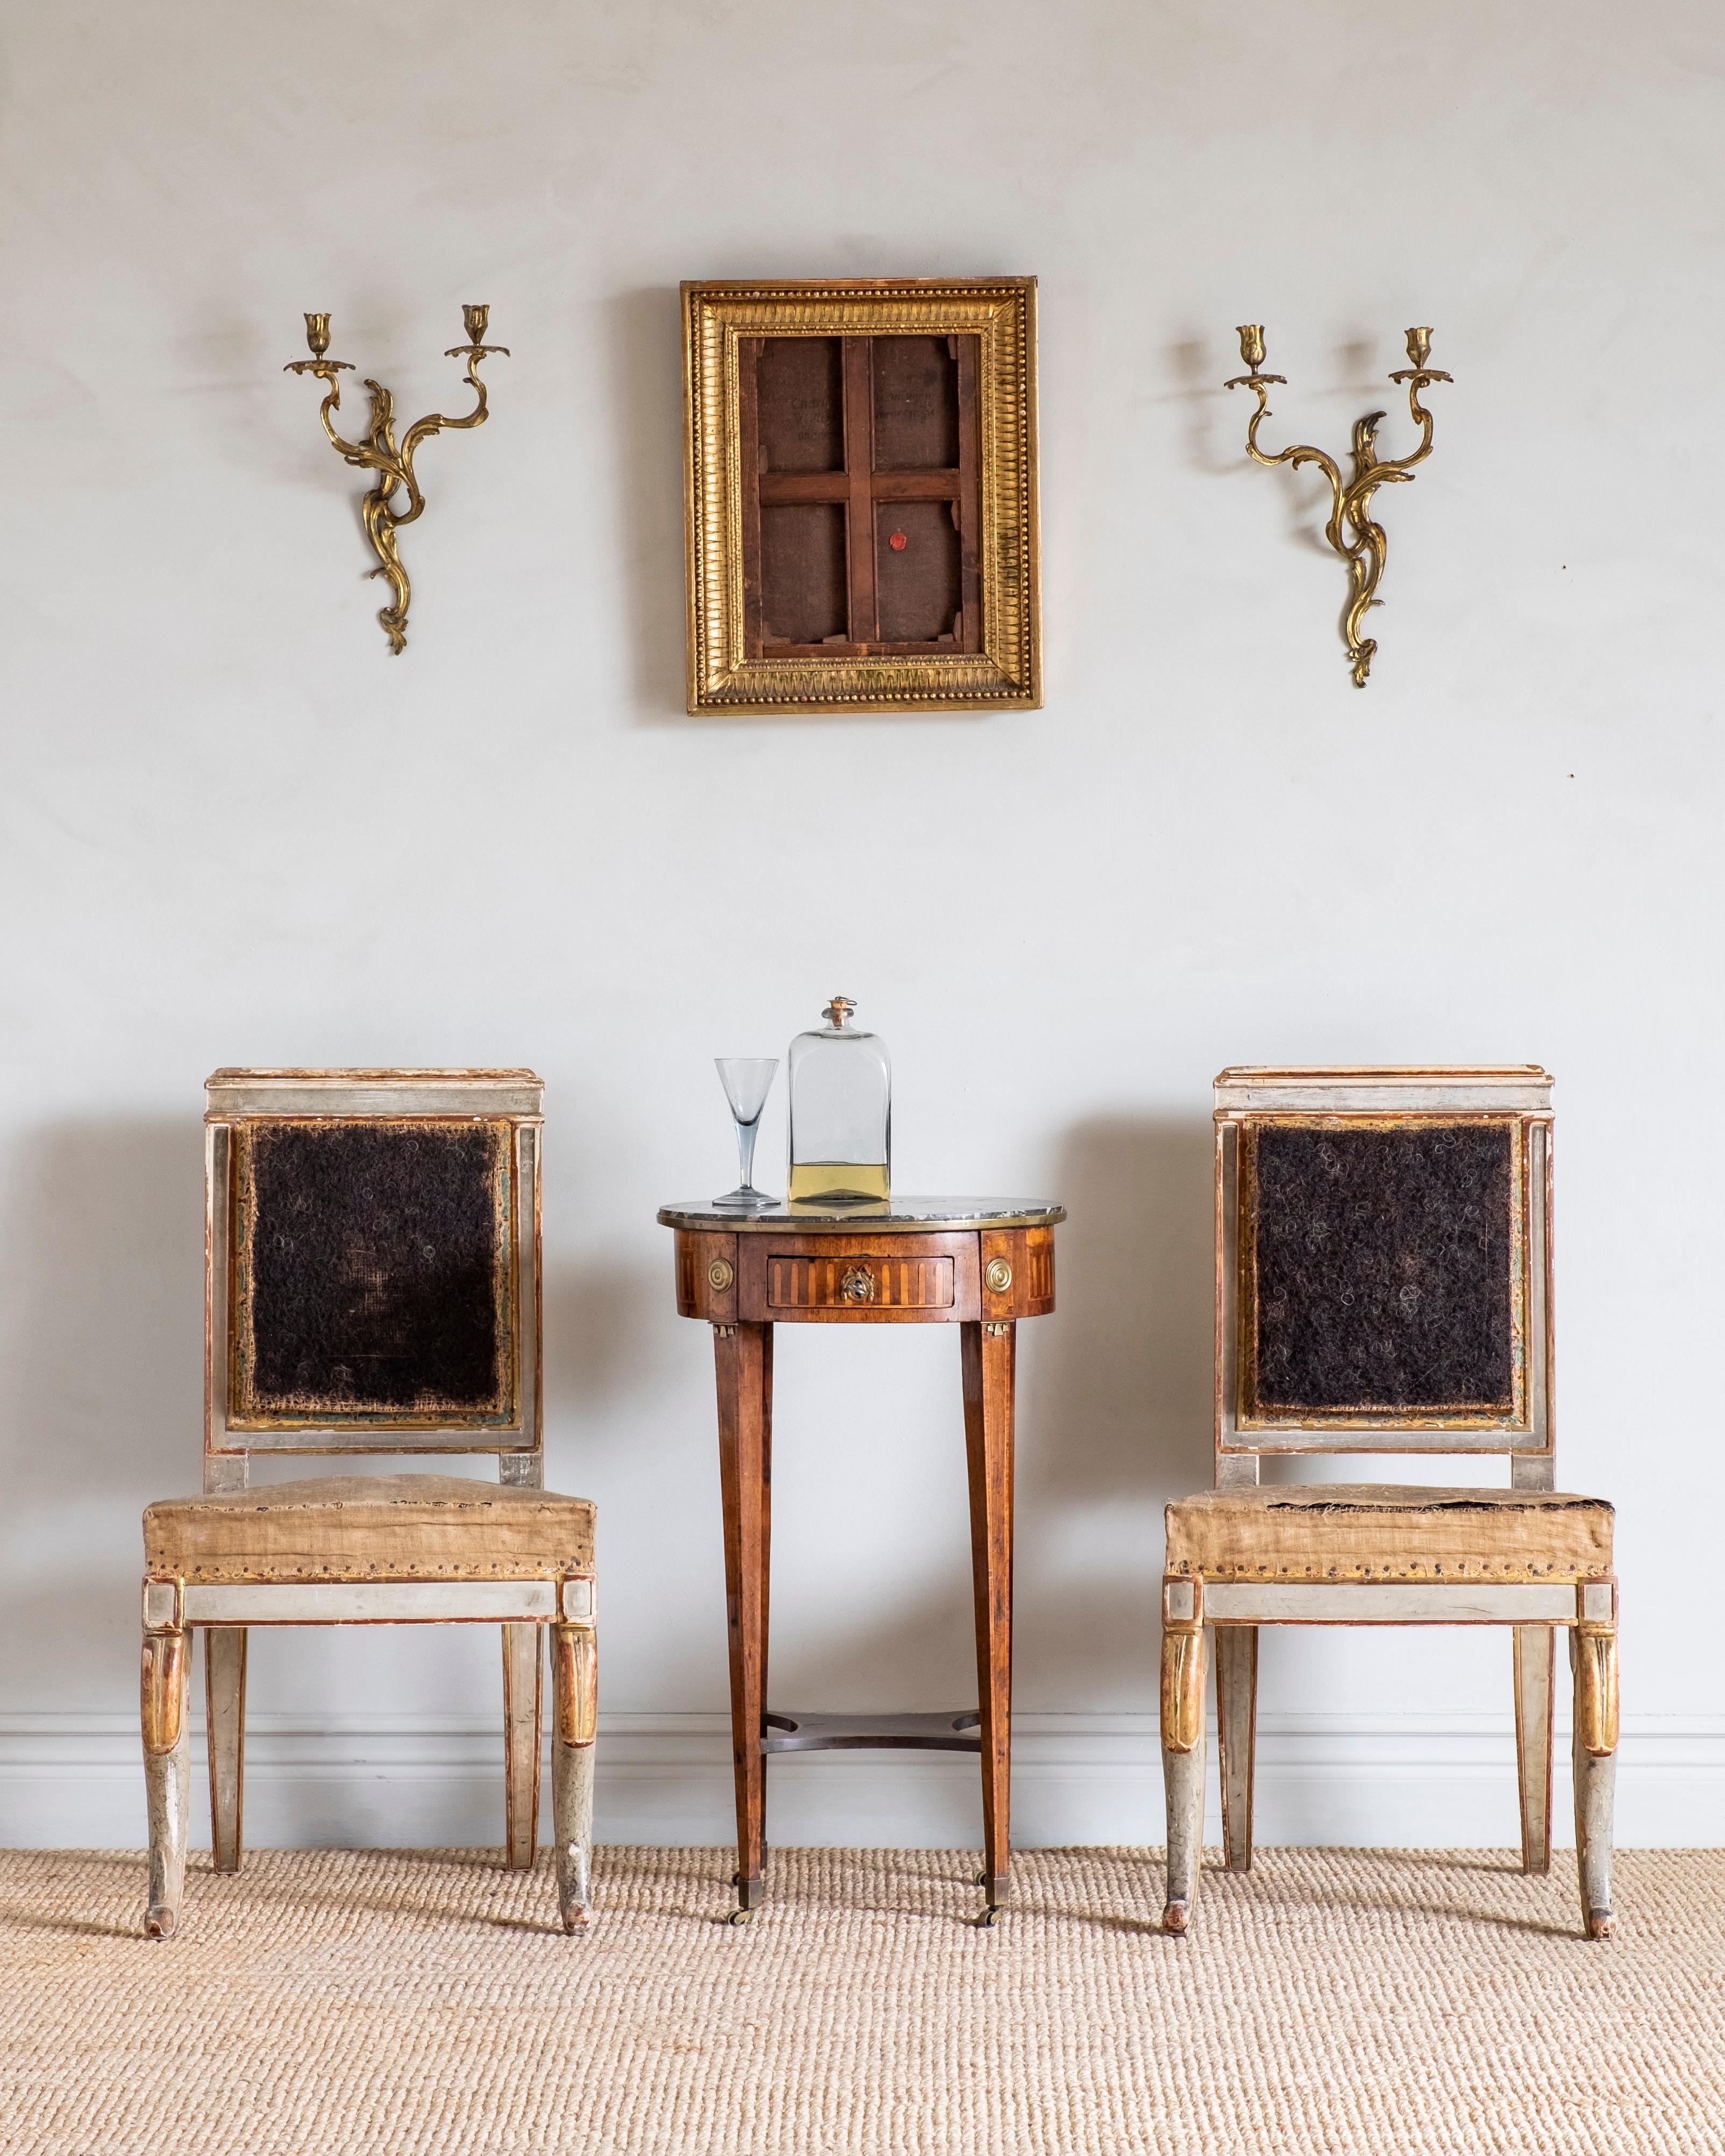 Fine pair of early 19th century Empire side chairs in their original condition, circa 1815, France. 

Good original condition with wear consistent with age and use. Structurally good and sturdy. A detailed condition report is available on request.